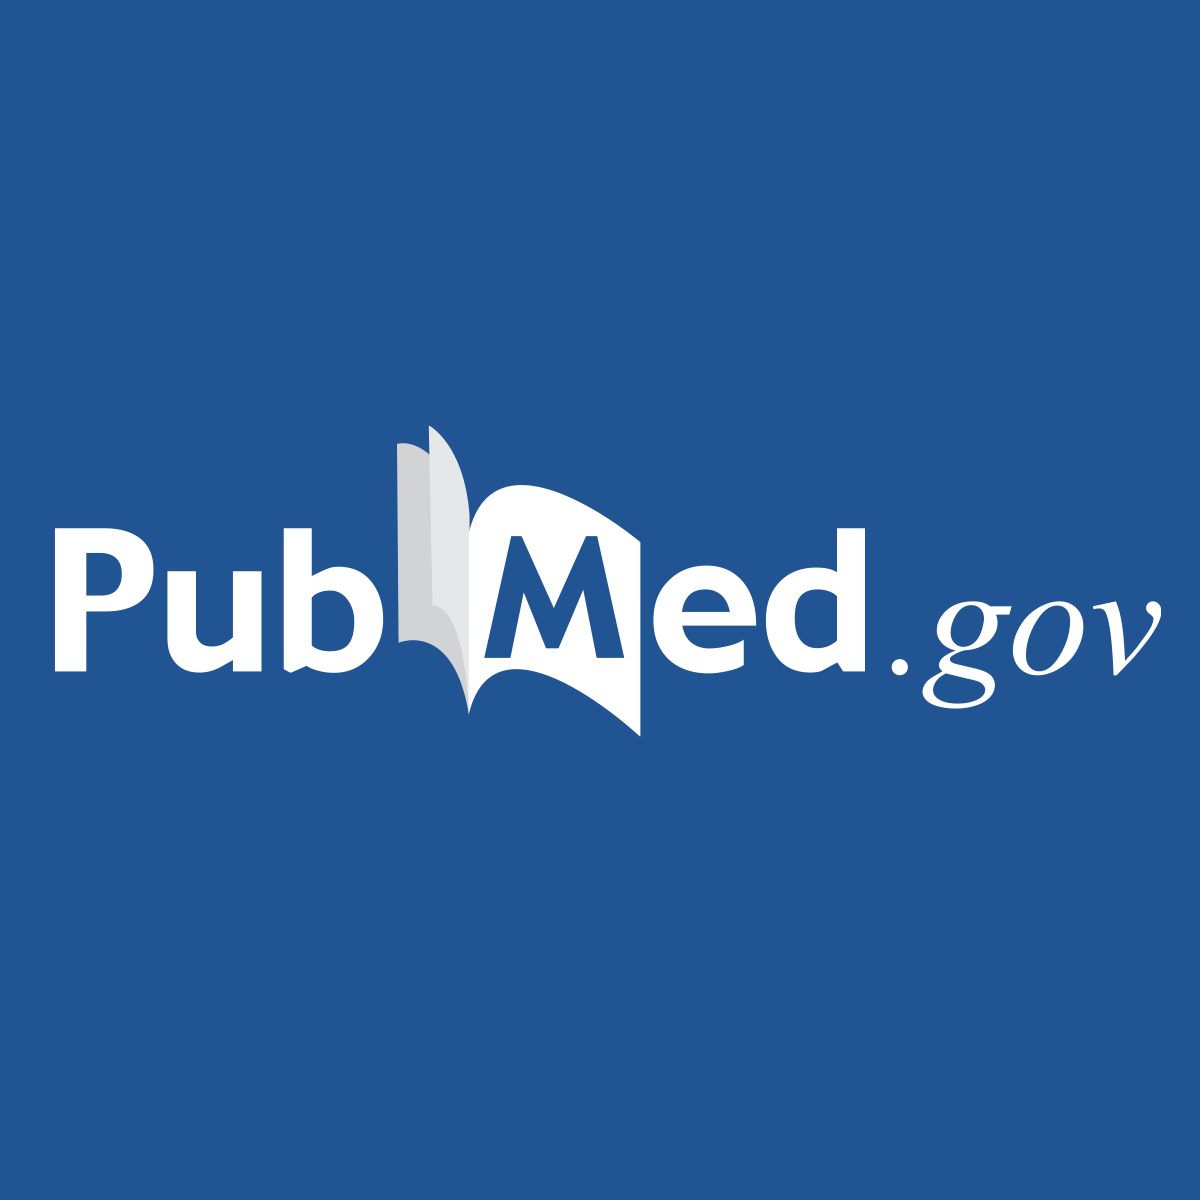 Association of tumour mutational burden with outcomes in patients with advanced solid tumours treated with pembrolizumab: prospective biomarker analysis of the multicohort, open-label, phase 2 KEYNOTE-158 study - PubMed